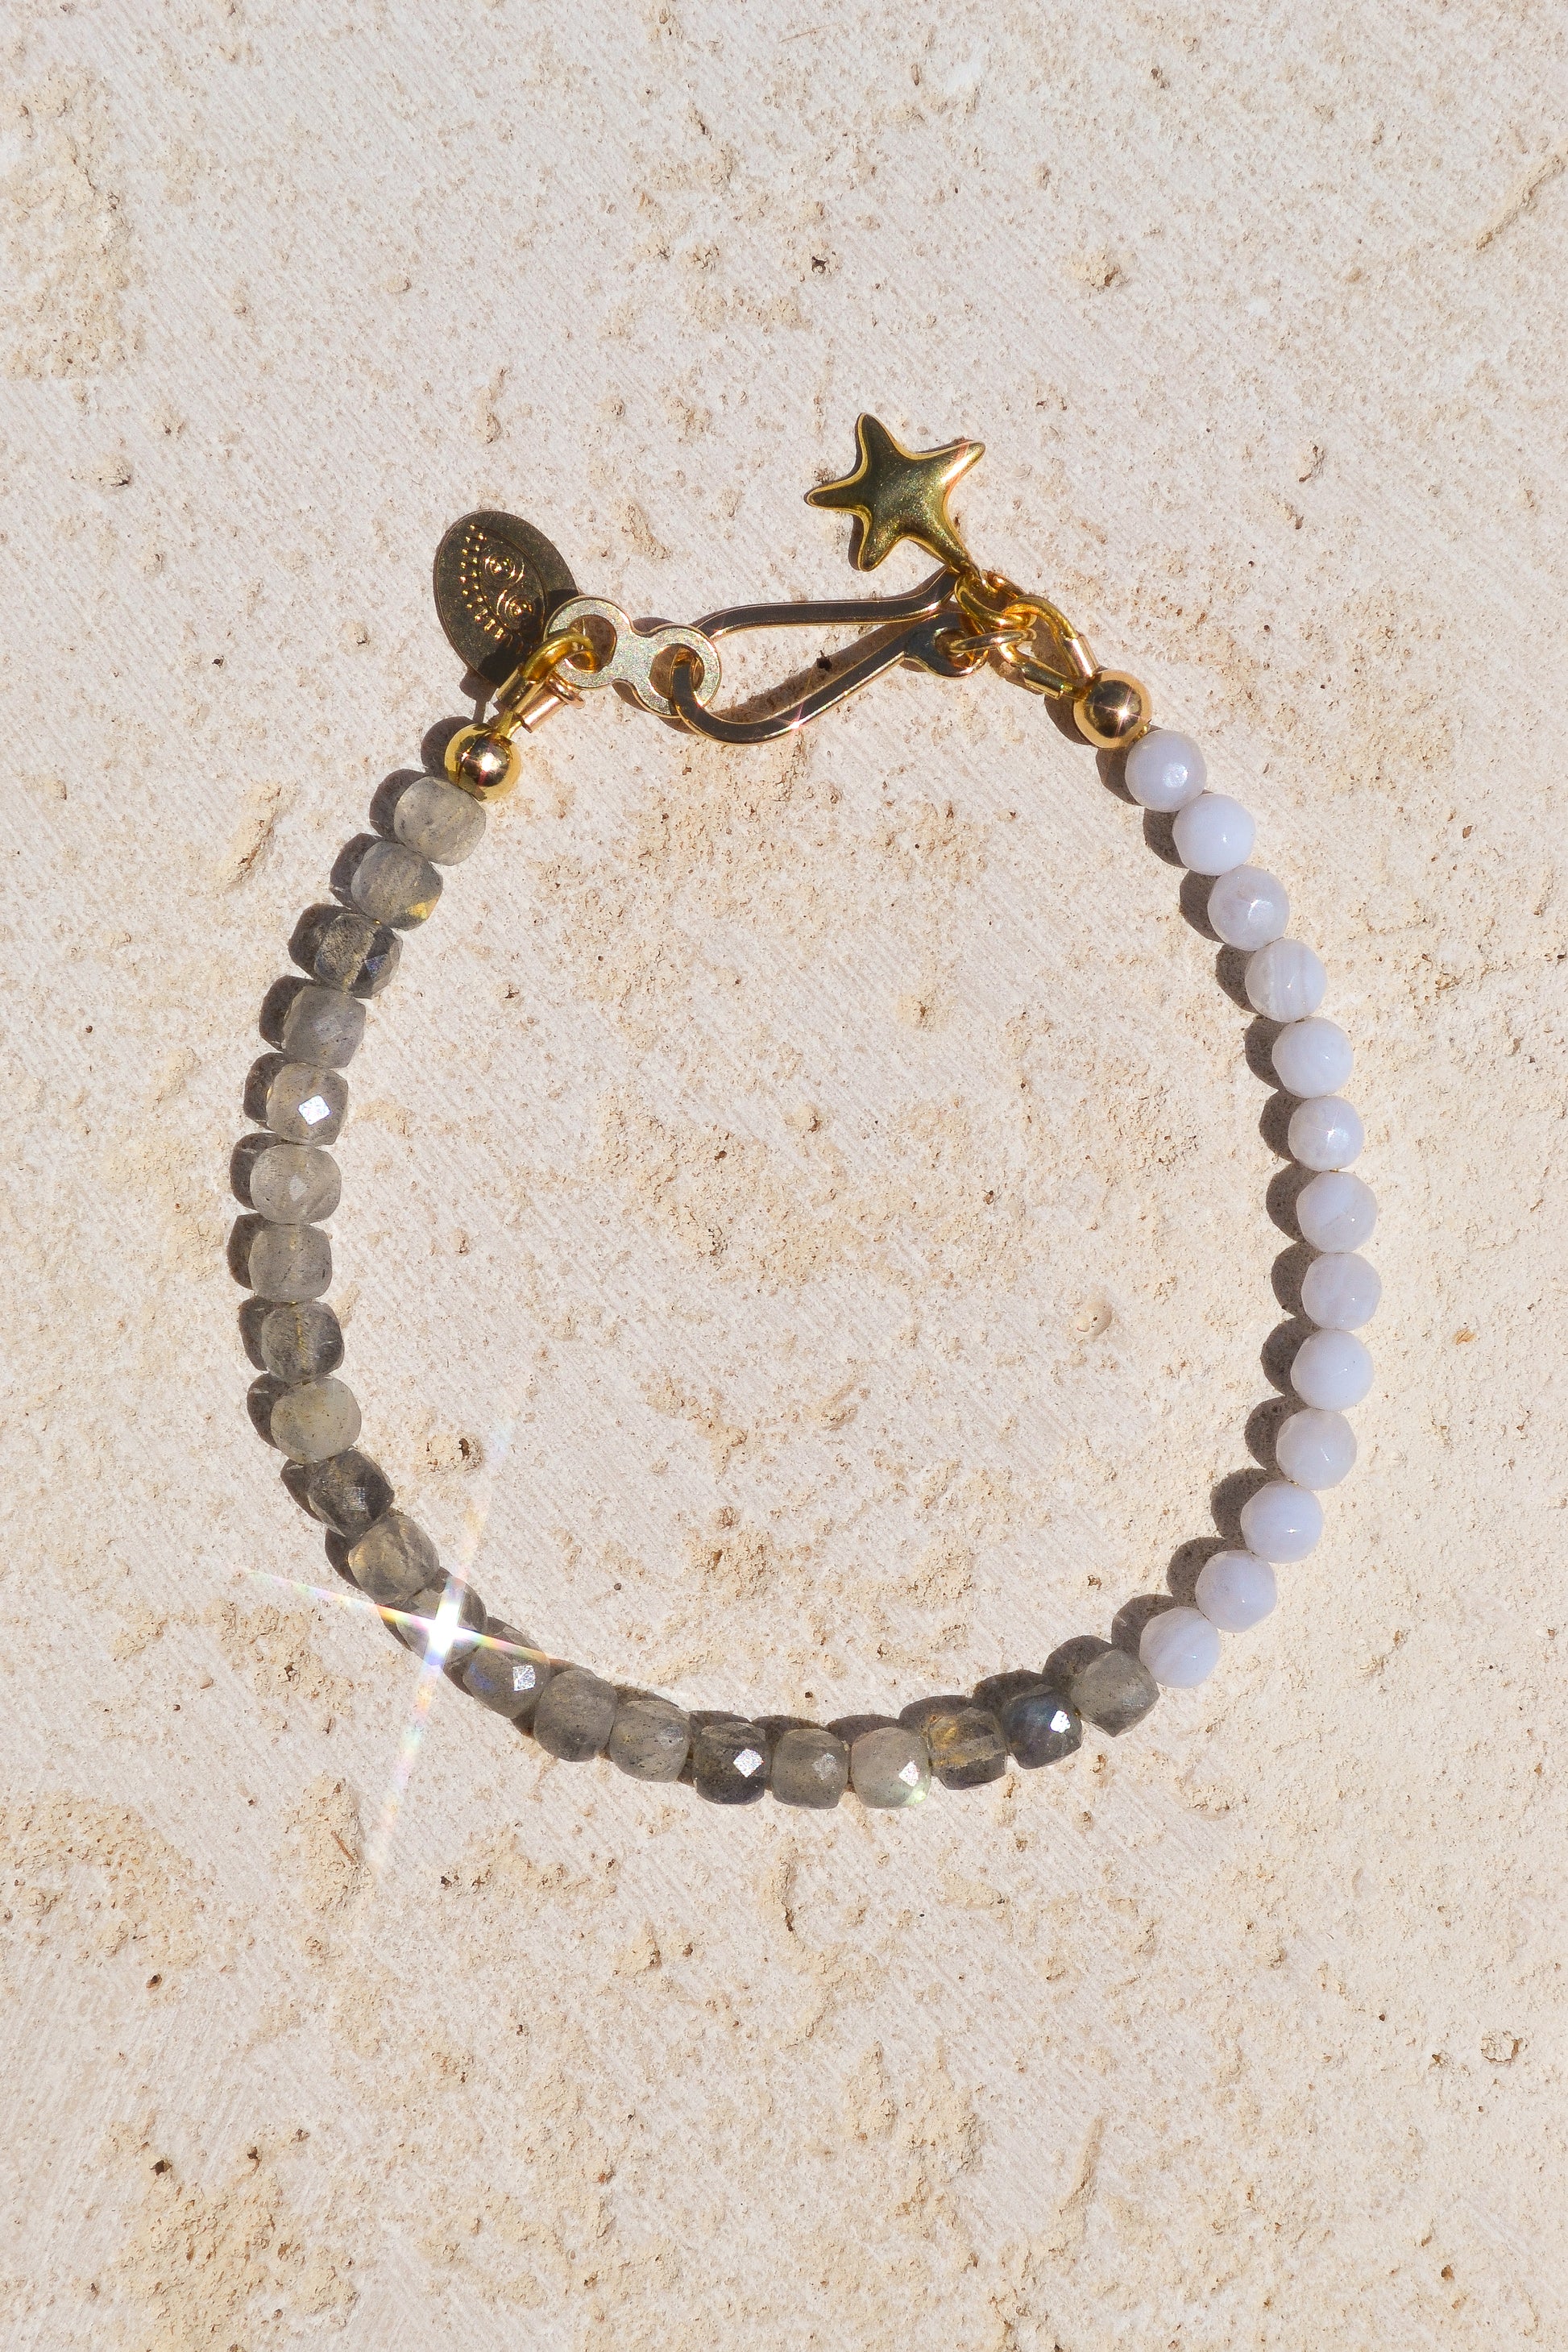 gold fill bracelet / Blue lace agate and labradorite pairing supercharges your flow state & heightens intuition. Gold fill findings. From Punkwasp's Power Collection - one of a kind pieces designed to energetically align you with your highest self.